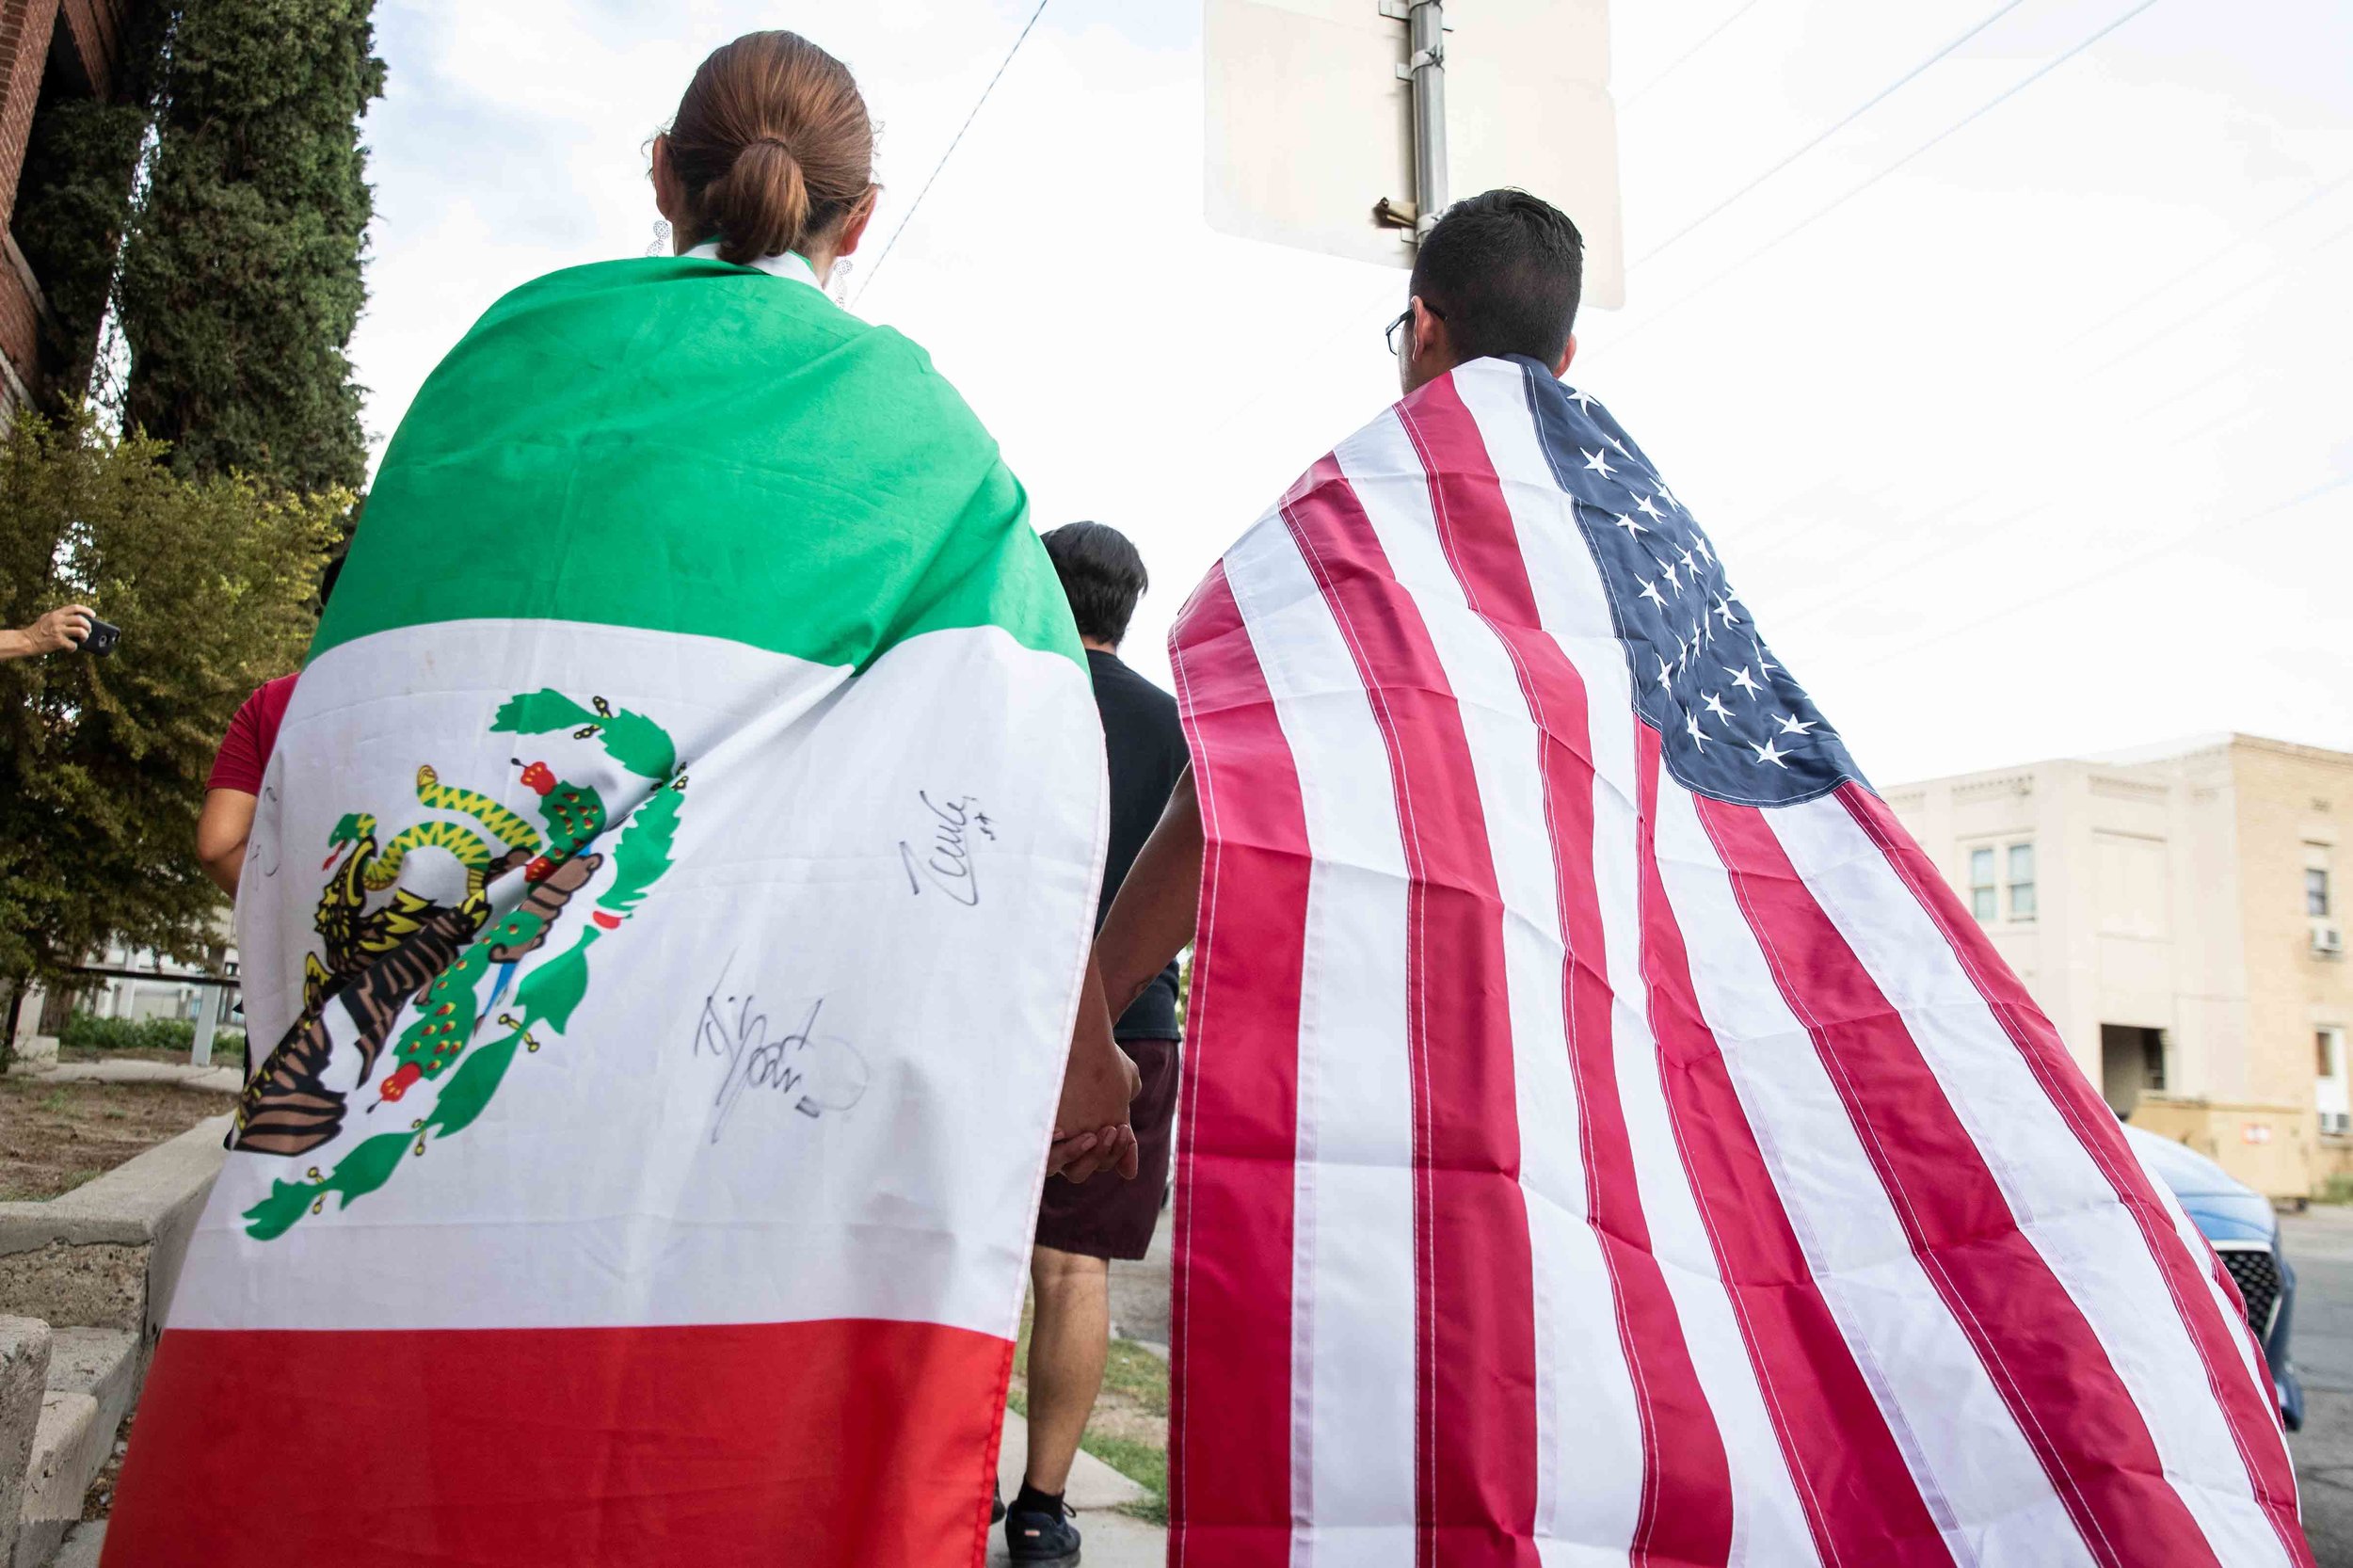  Samantha Ordaz (left) and Cesar Antonio Pacheco (right) carry the flags of Mexico and the United States as they walk holding hands during a silent march in honor to the victims of a mass shooting occurred in Walmart on Satuday morning in El Paso on 